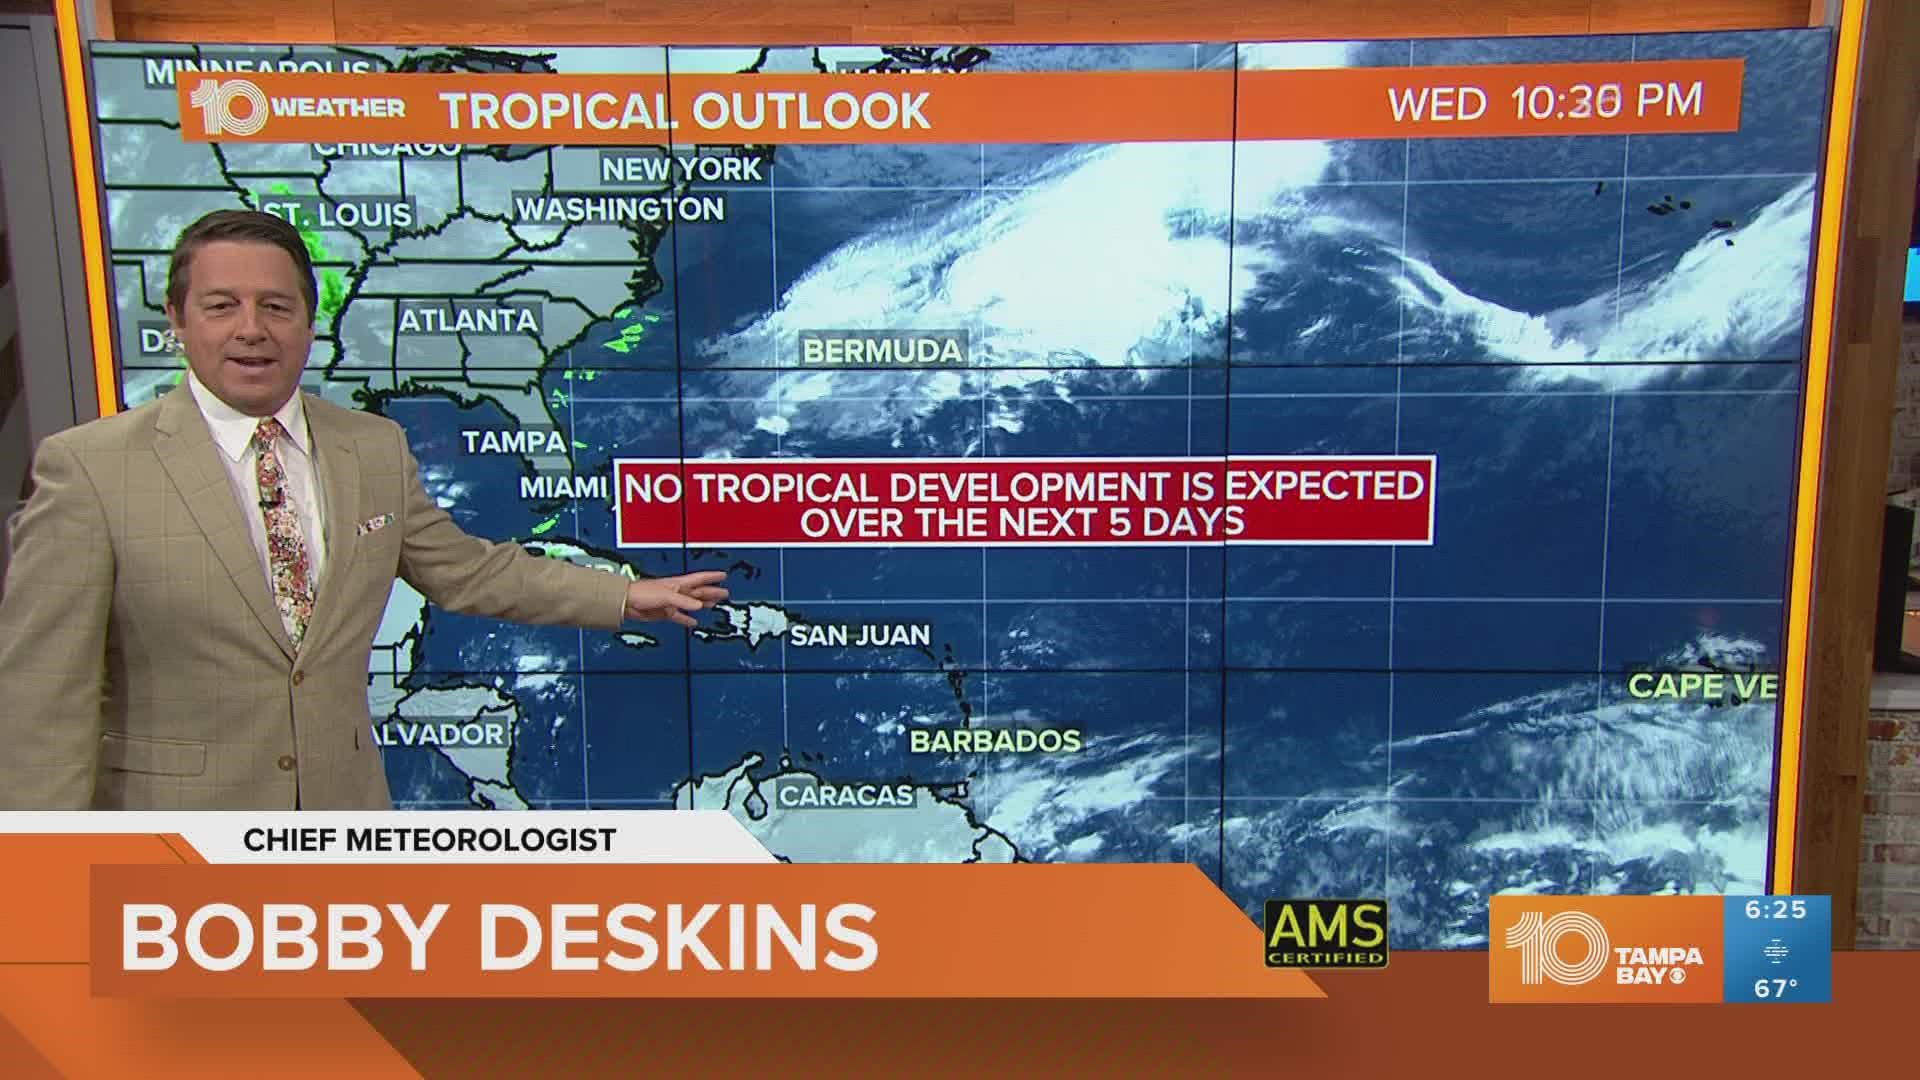 No tropical development is expected over the next five days.